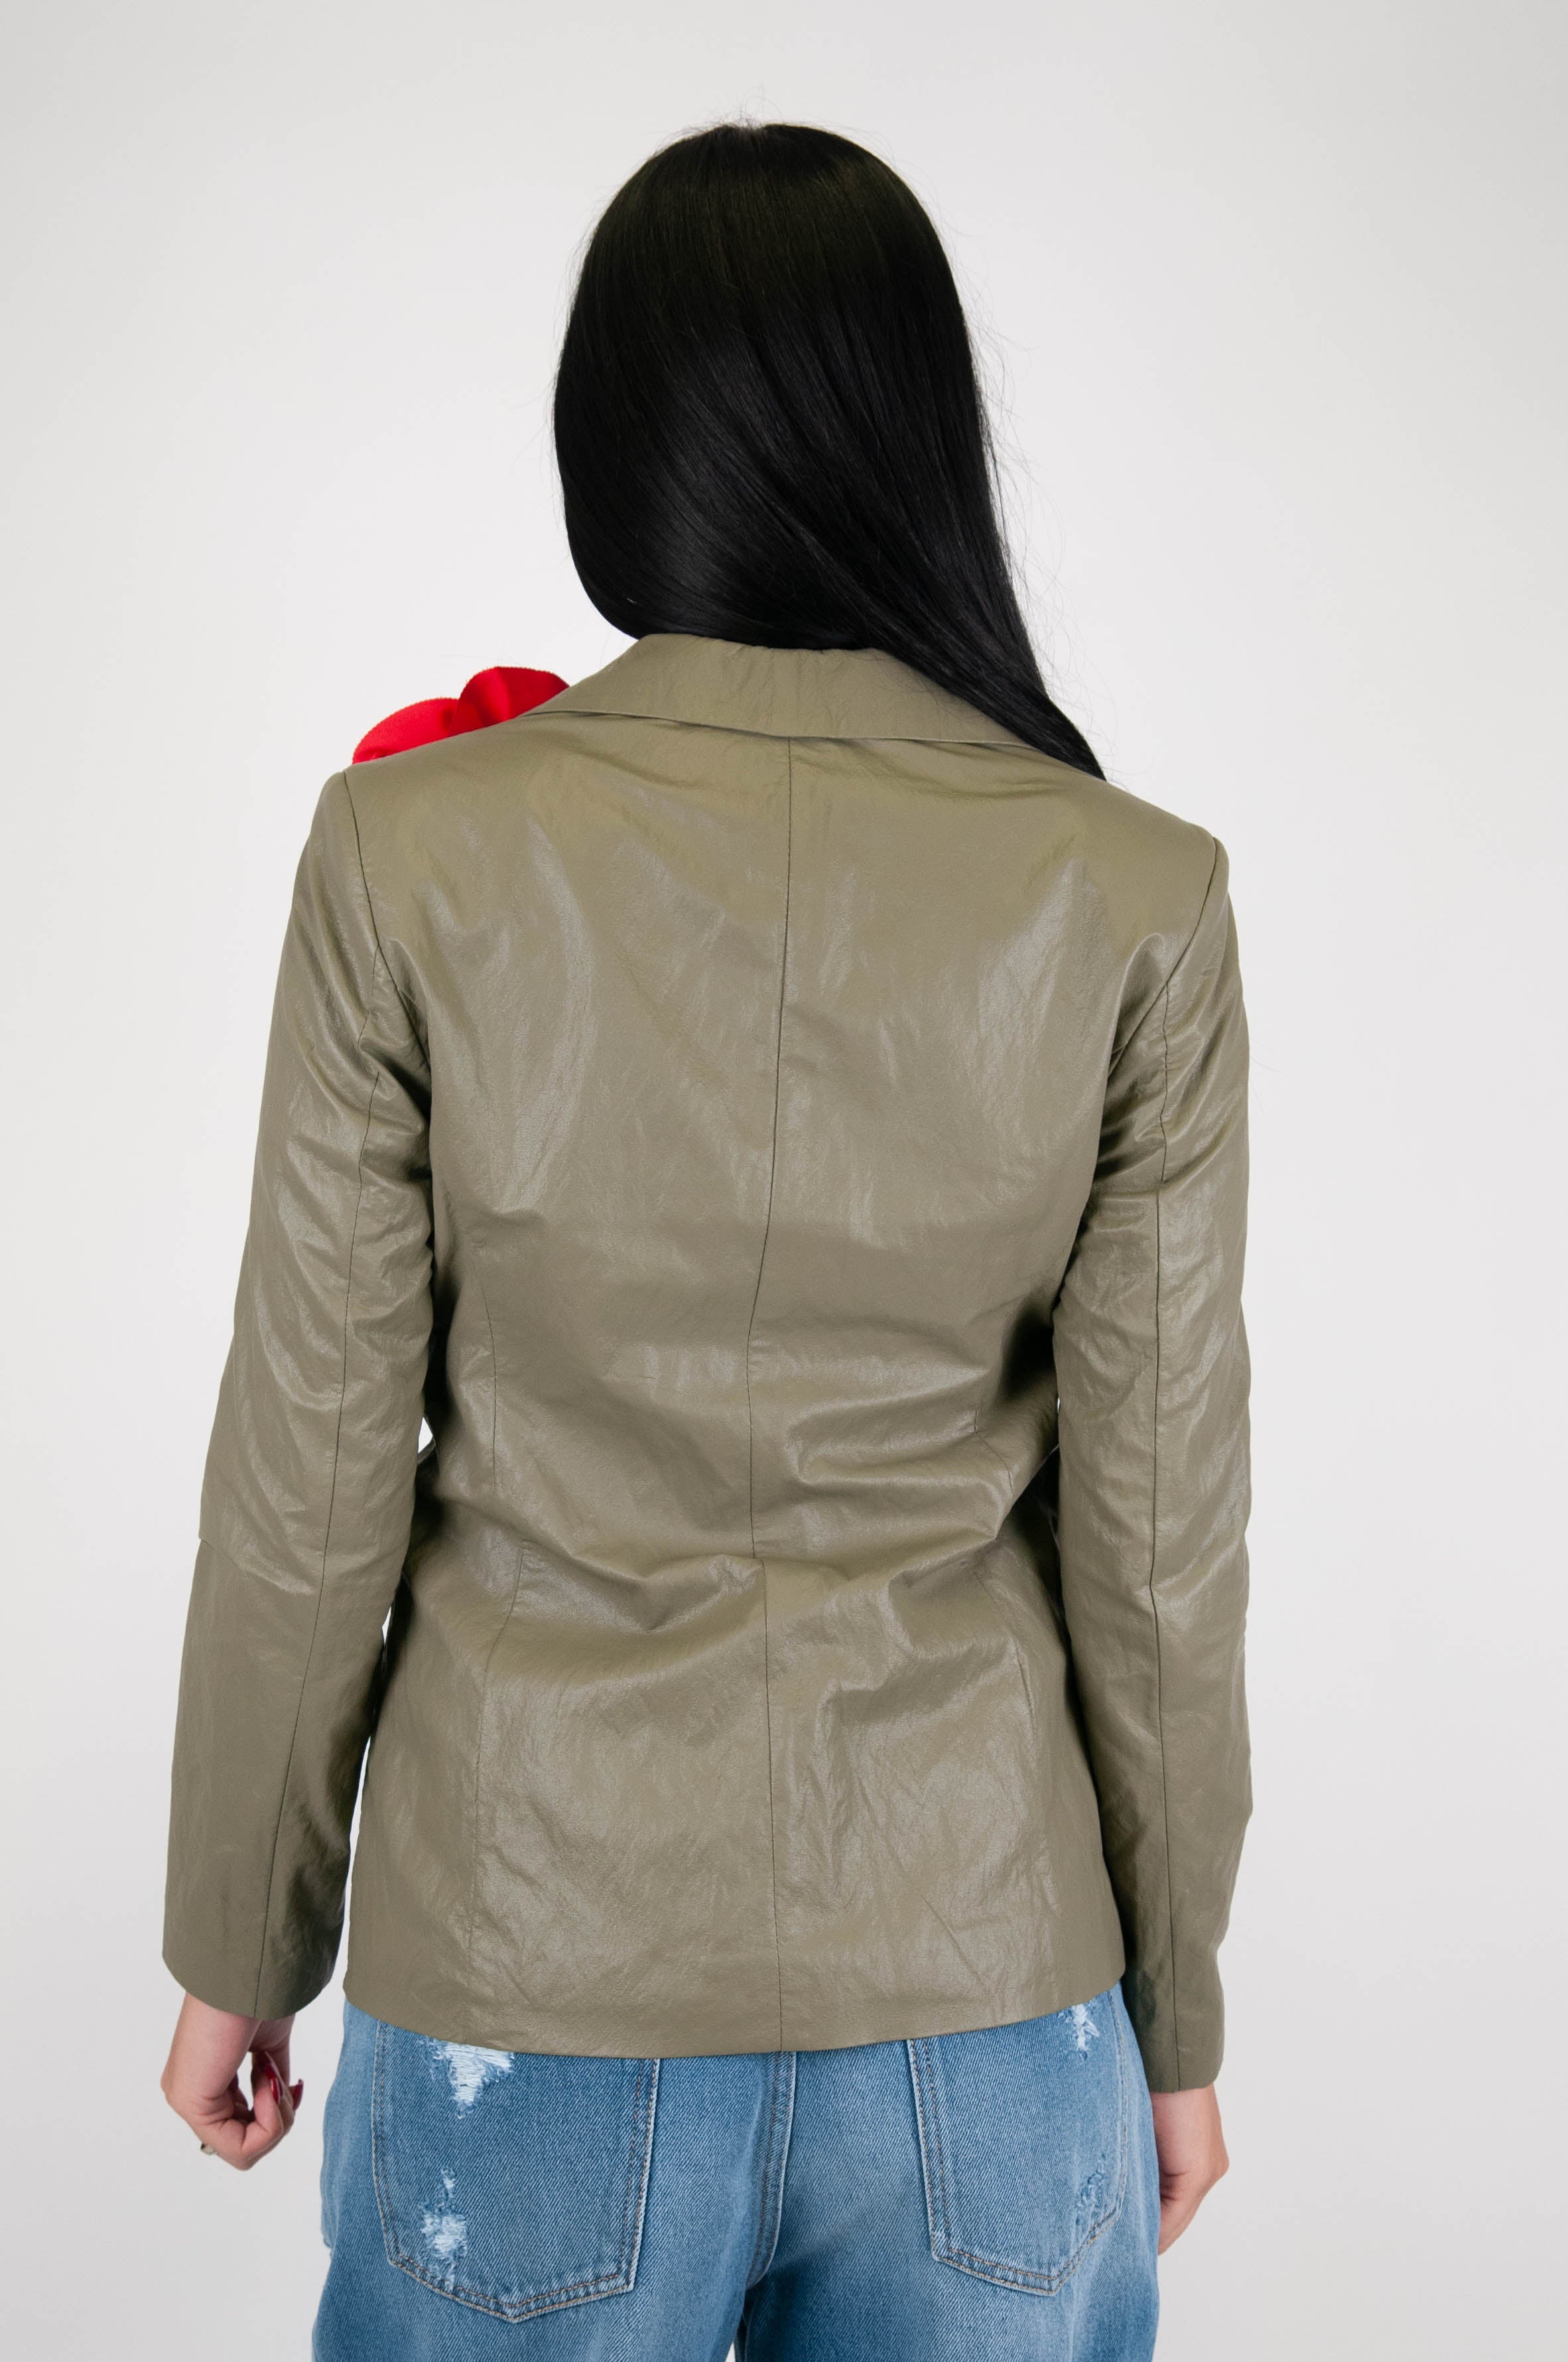 Maryley - Single-breasted jacket in wrinkled eco-leather with flower brooch